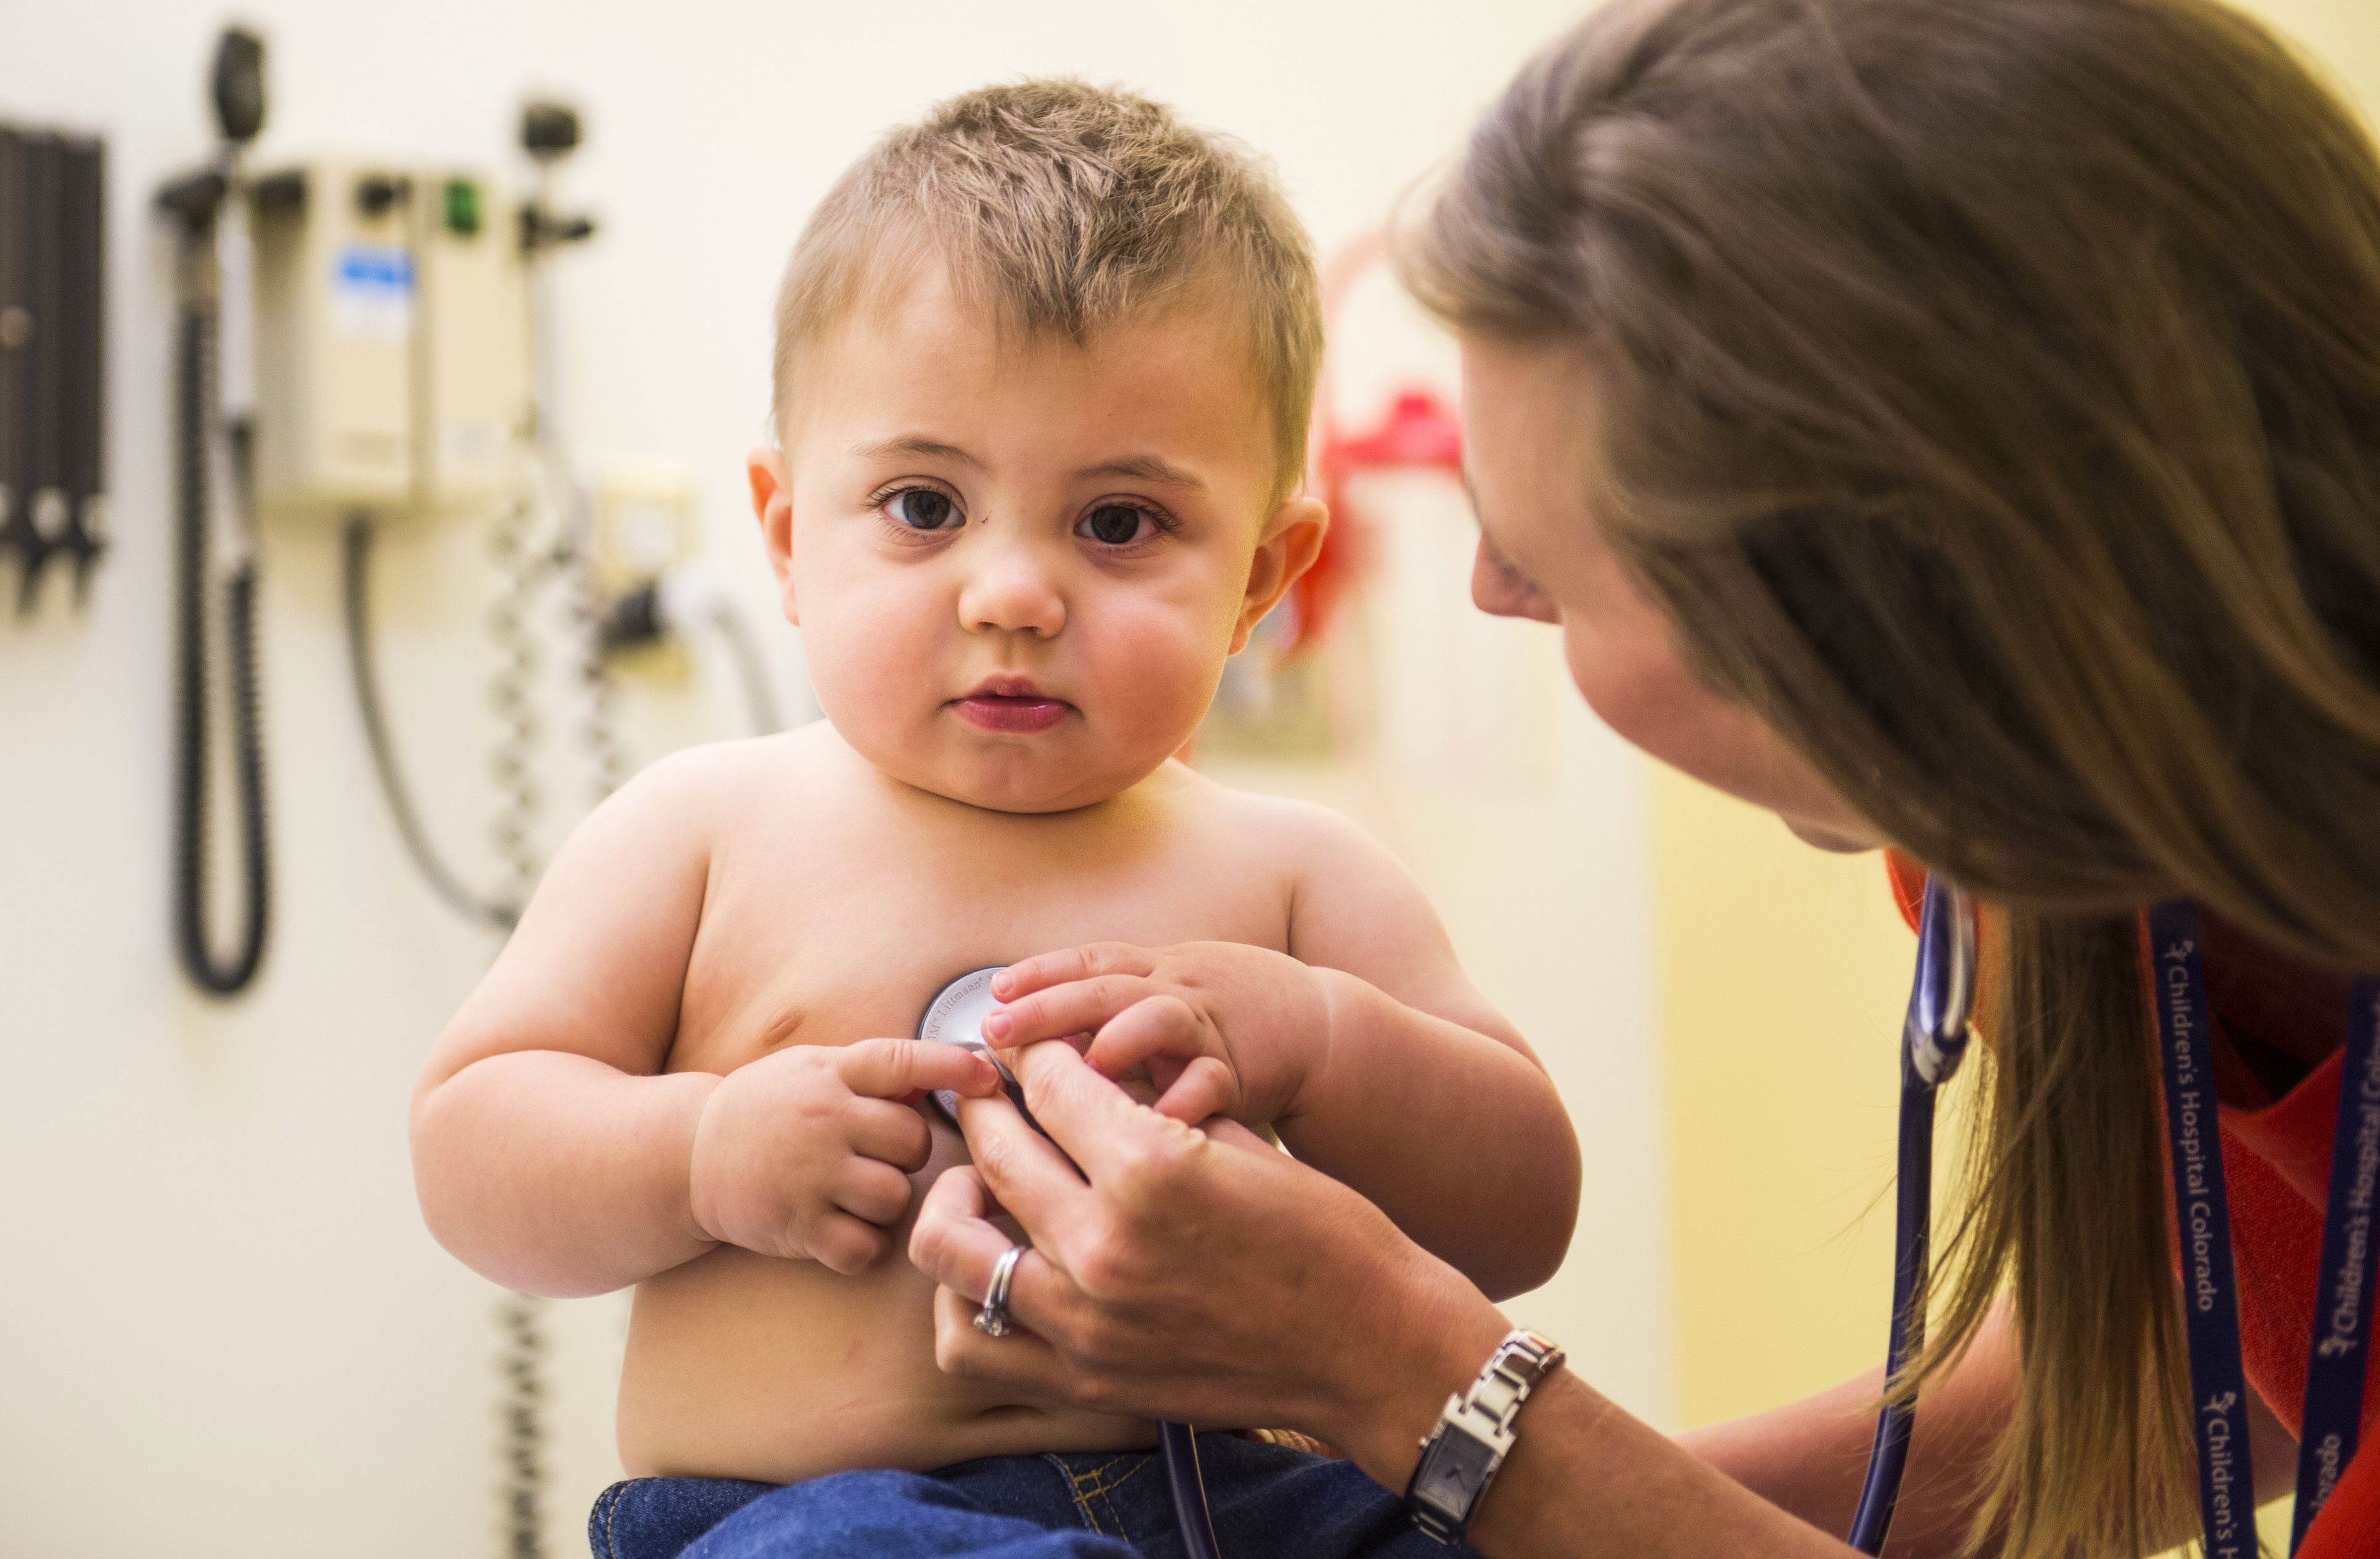 A toddler with brown hair sits in a doctor's office while a doctor examines him with a stethoscope.